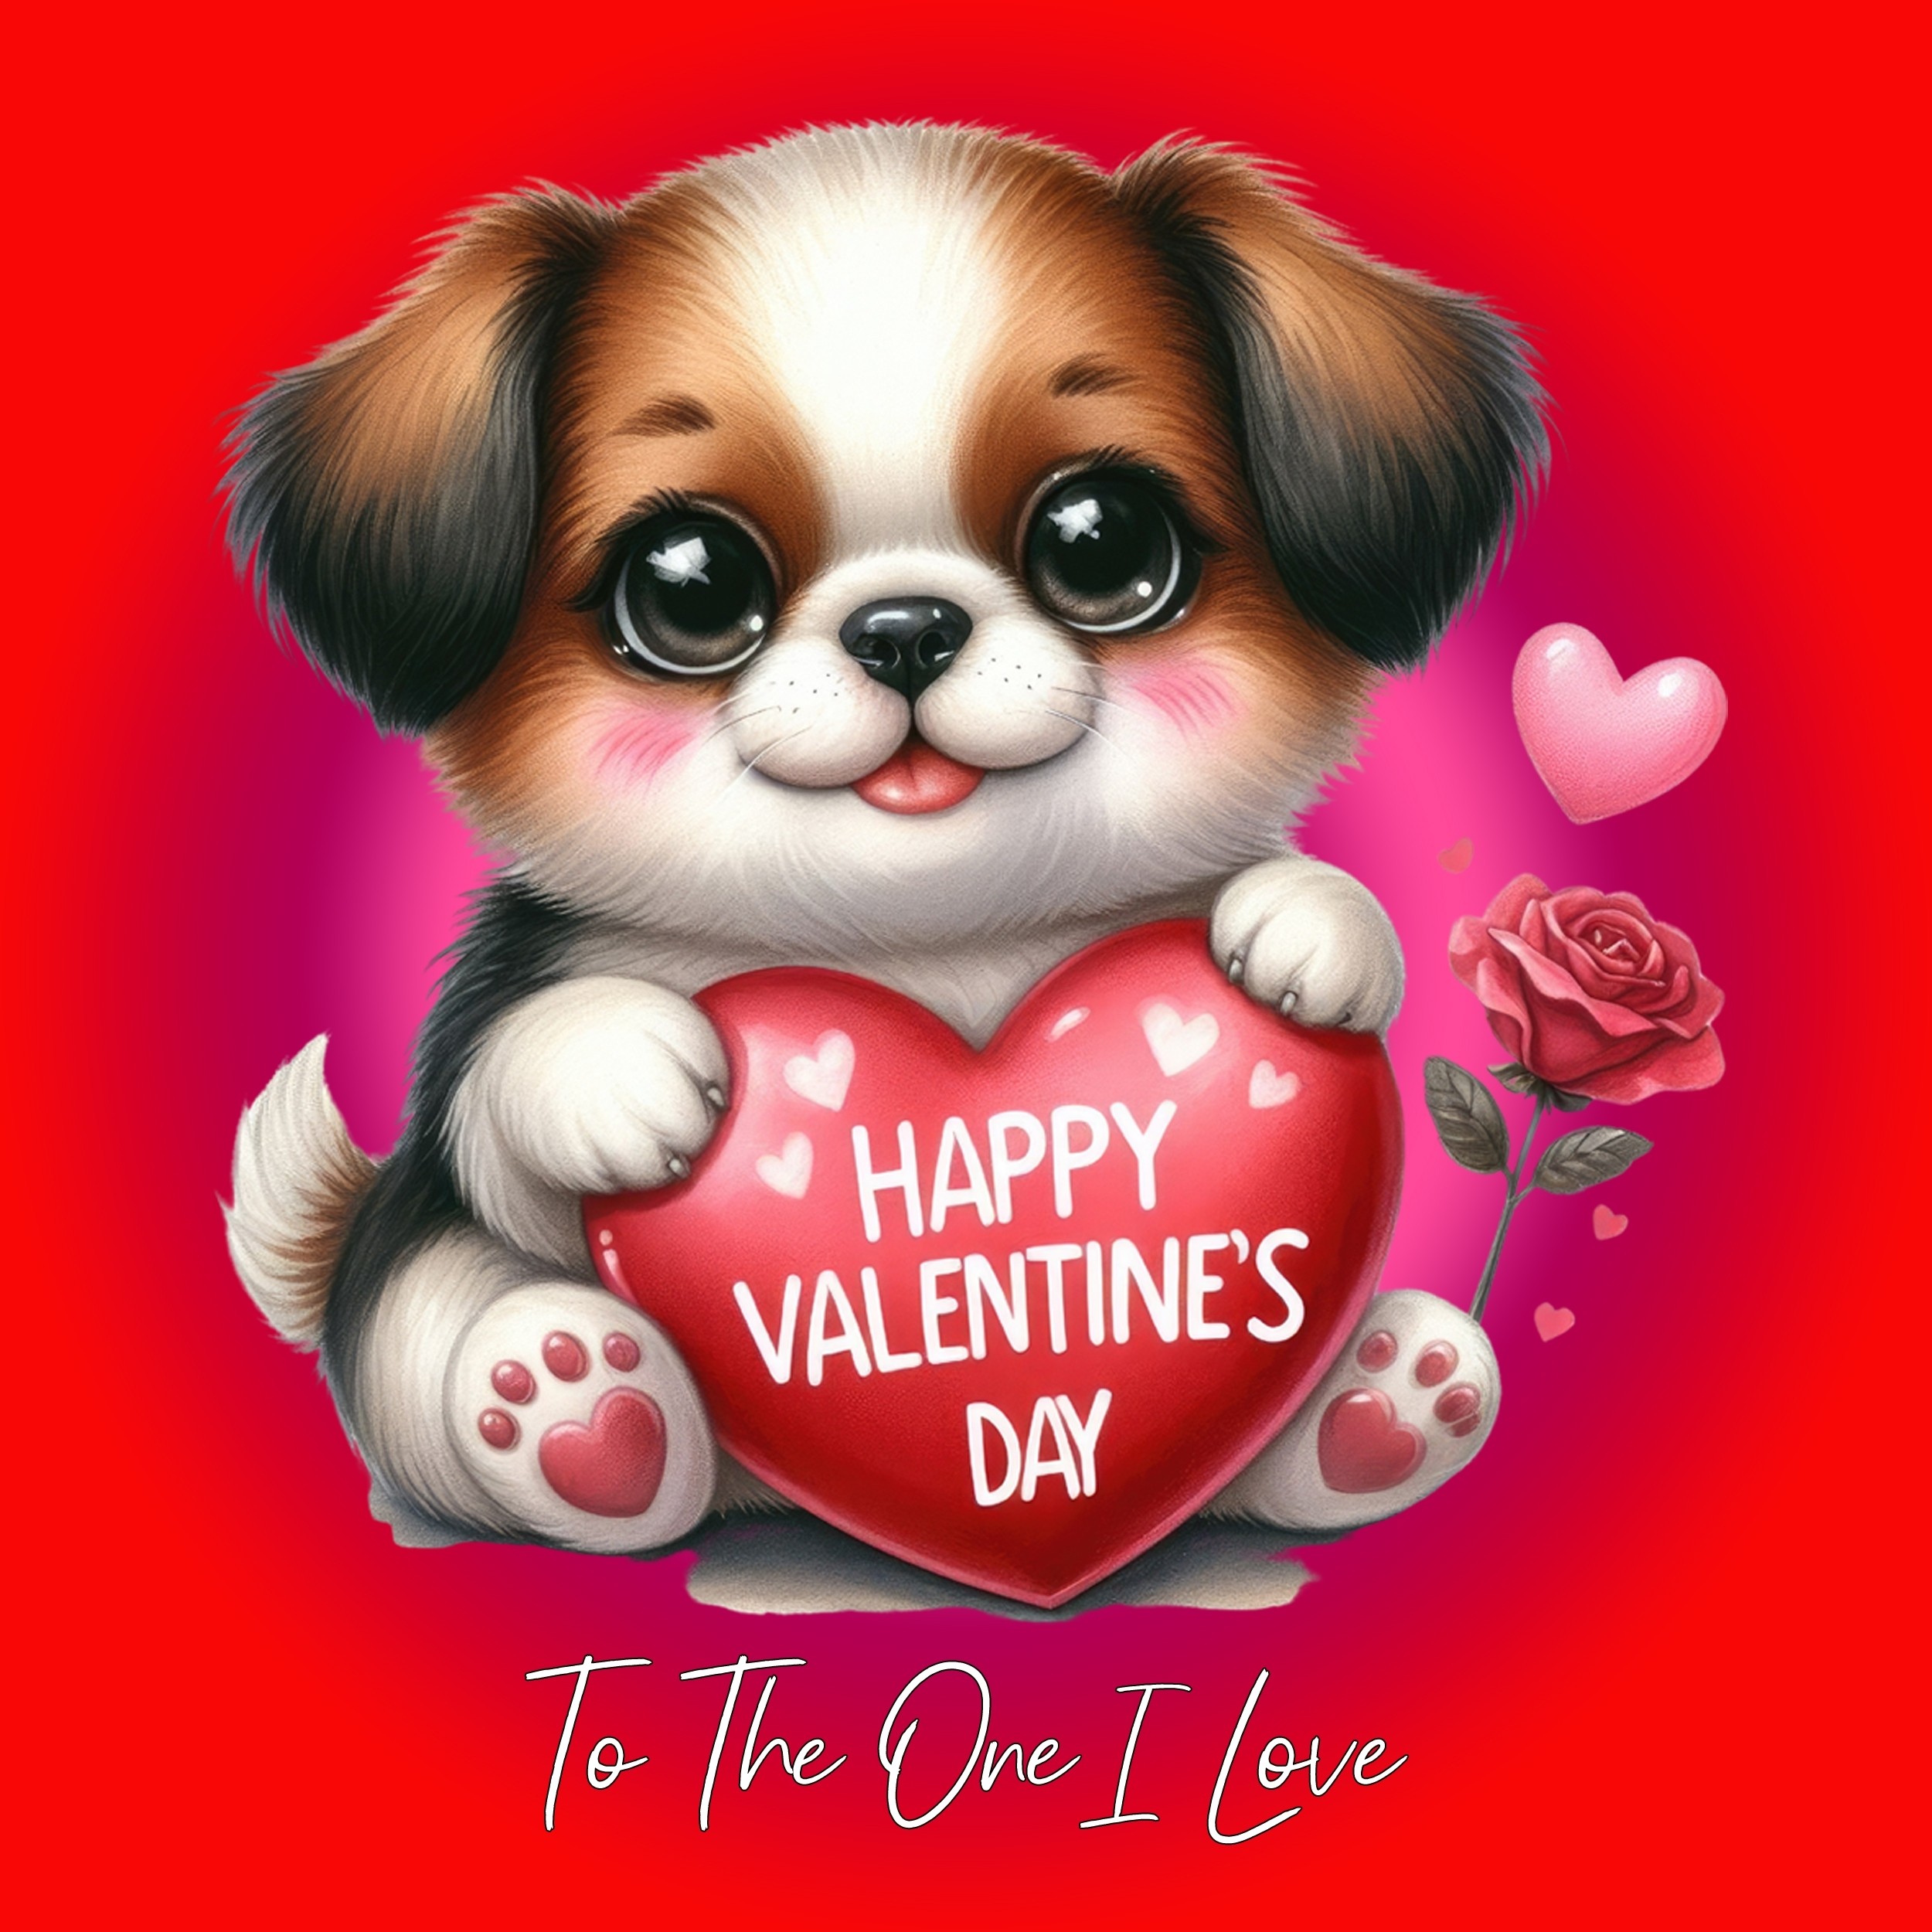 Valentines Day Square Card for One I Love (Dog)